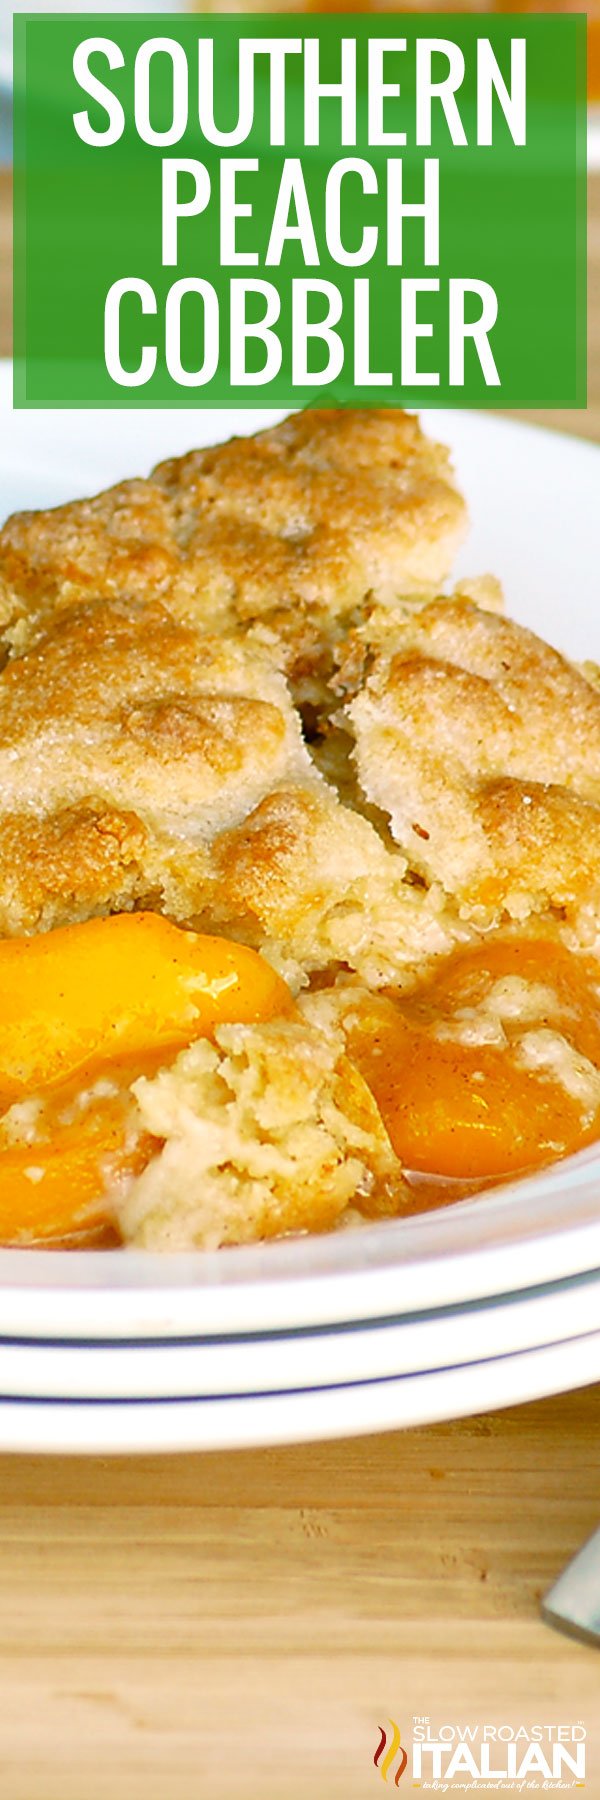 titled image (and shown): Southern Peach Cobbler